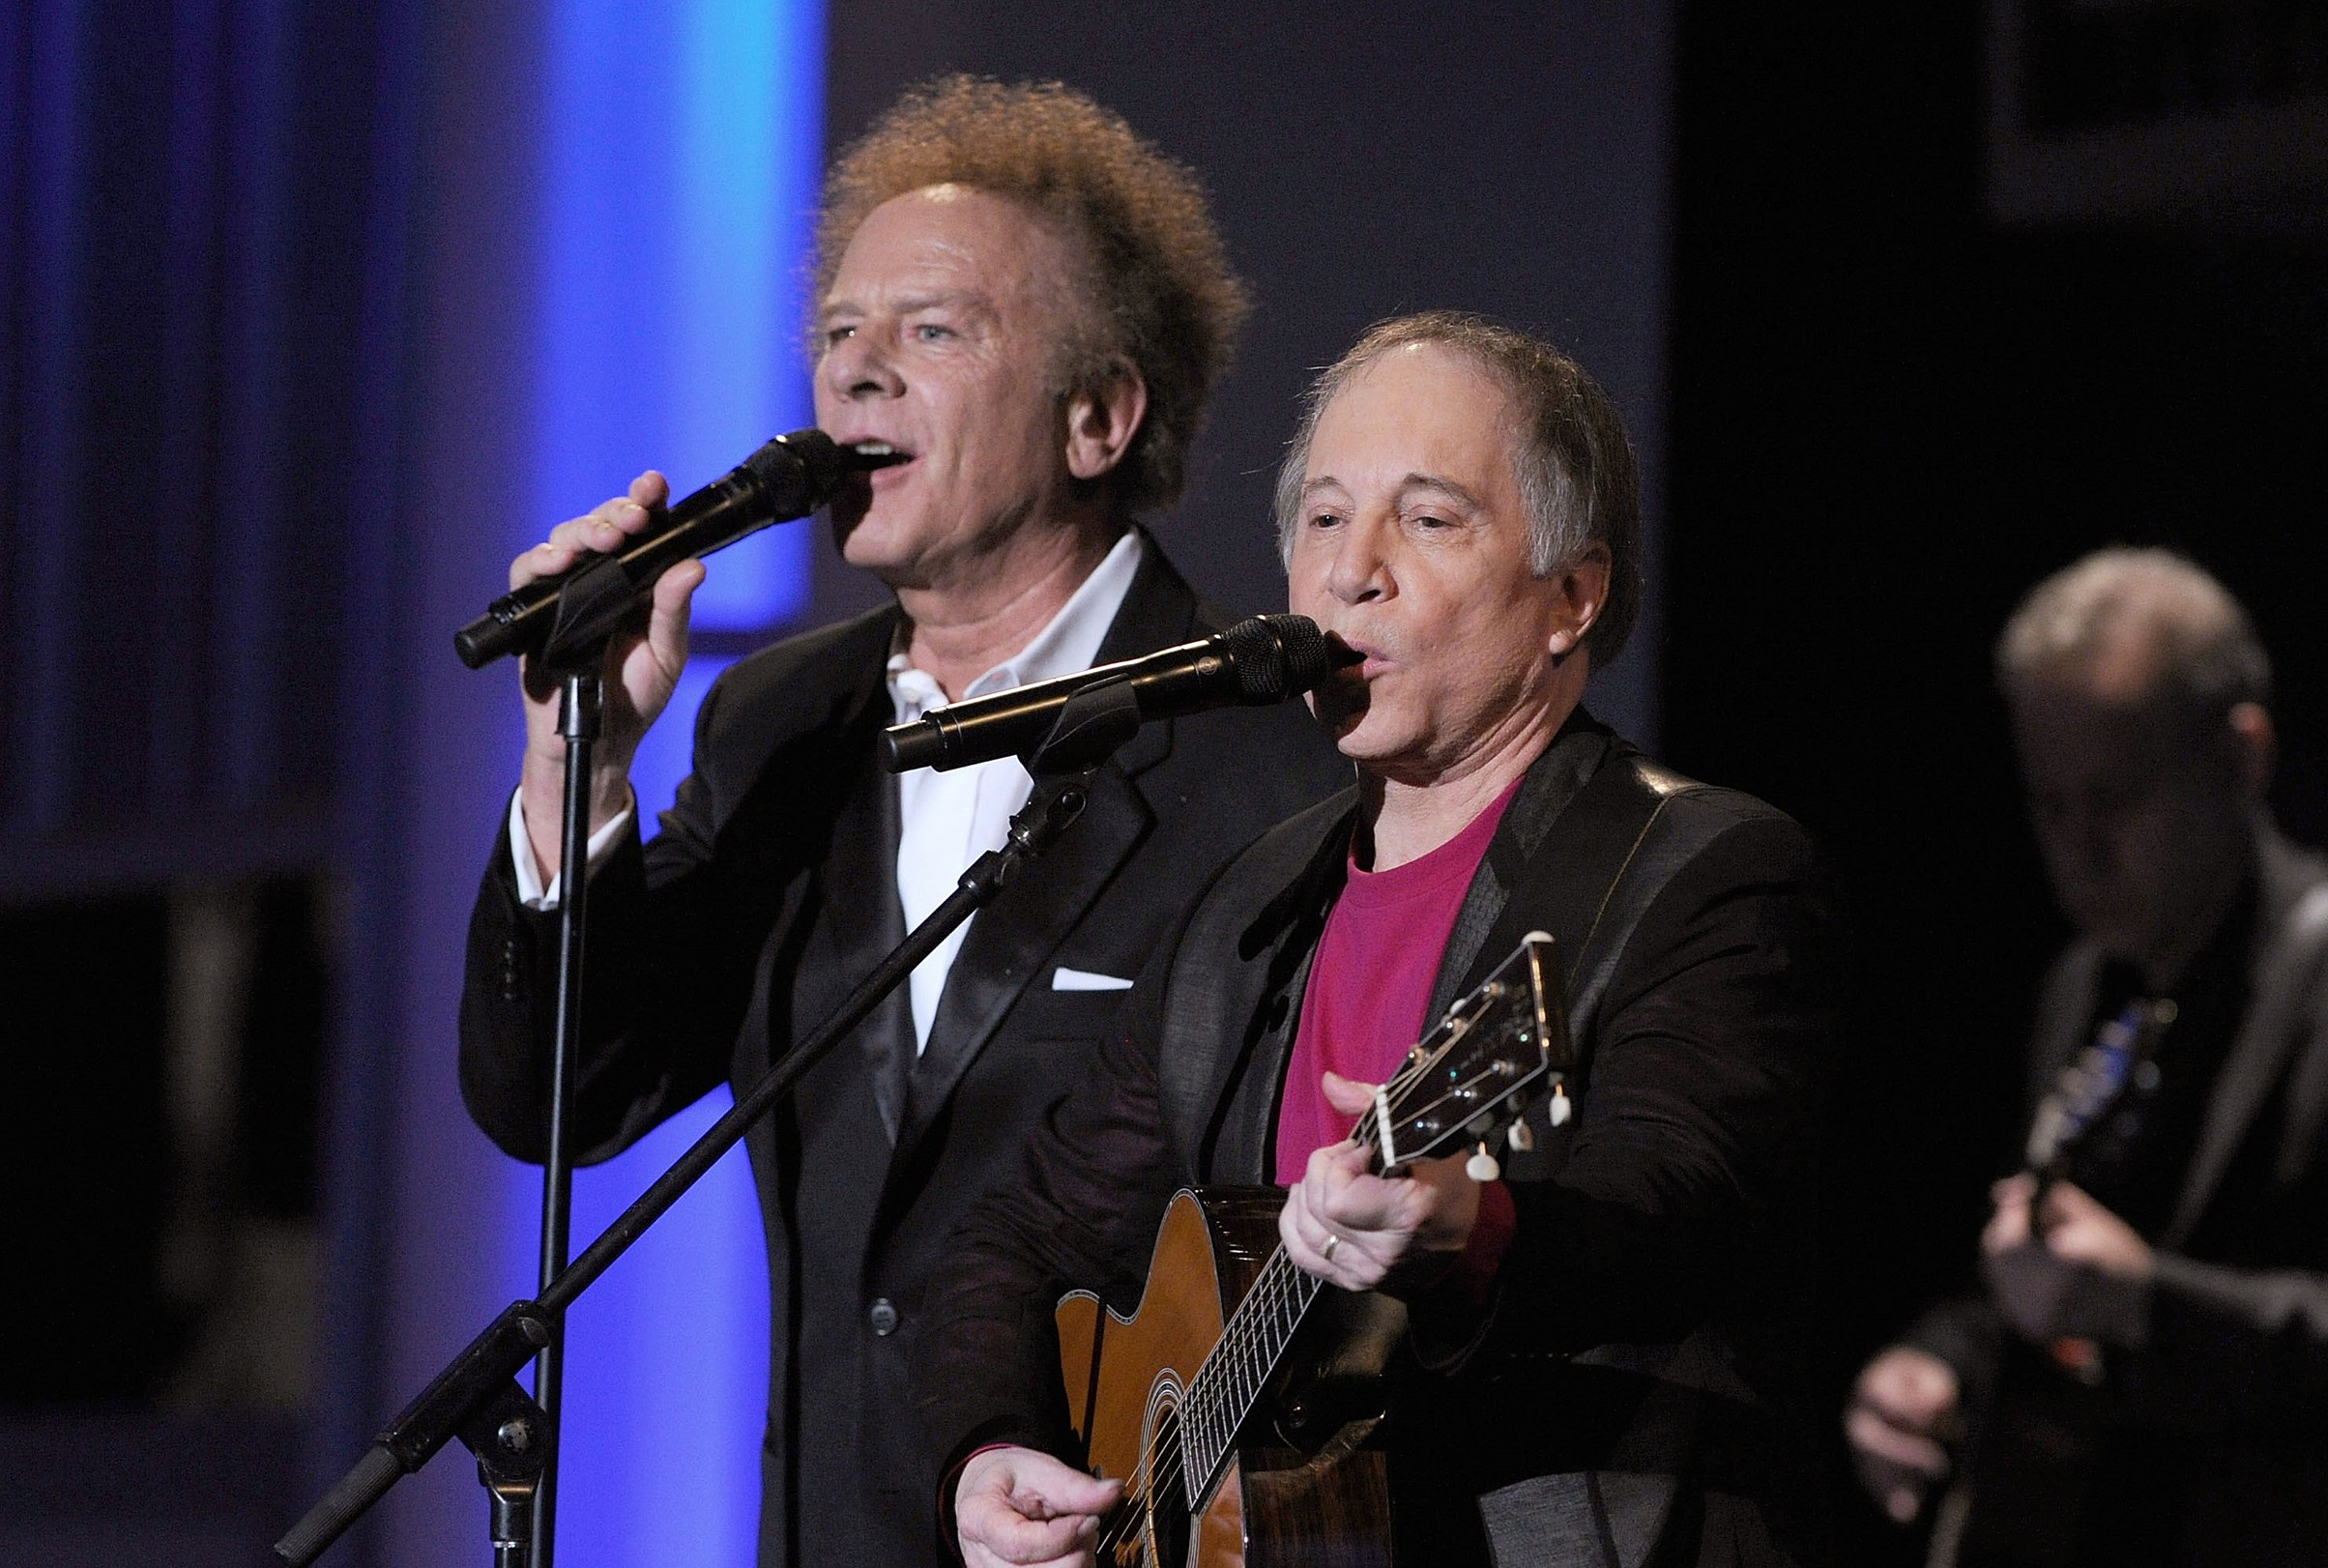 Simon and Garfunkel in happier times. 2010 photo by Frazer Harrison/Getty Images for AFI